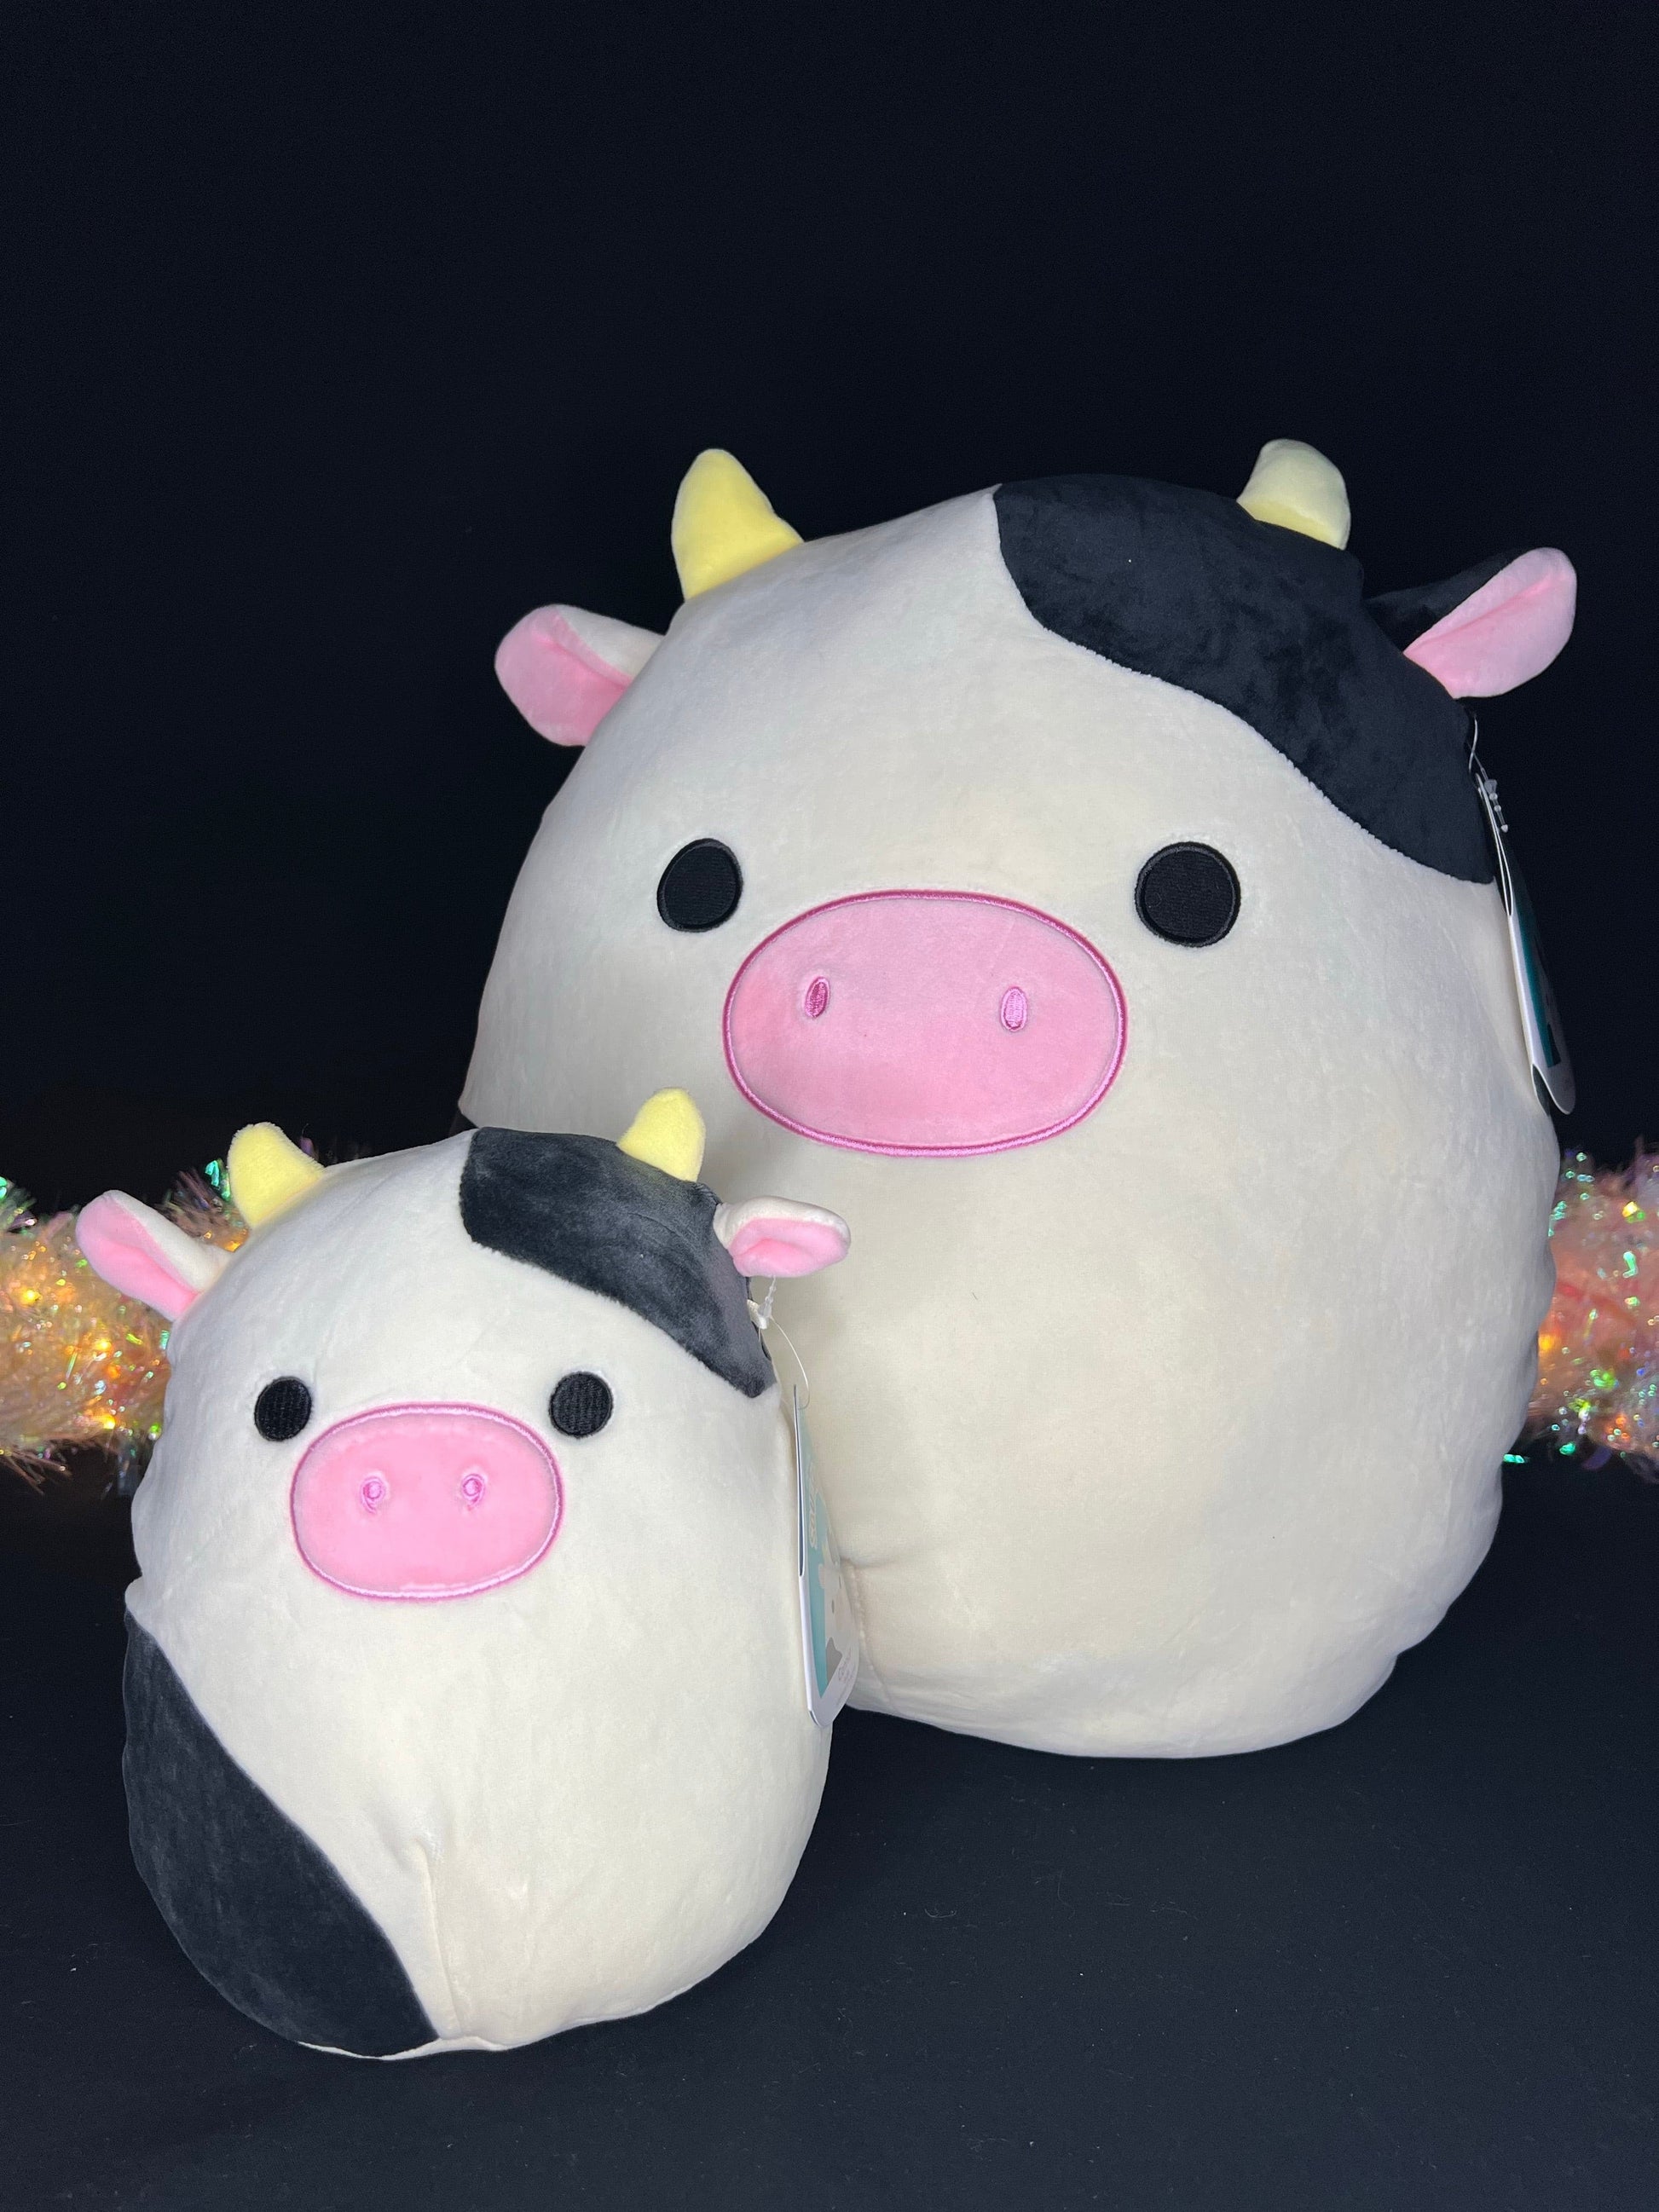 Squishmallows Official Kellytoy Plush 7.5 Inch Squishy Stuffed Toy Animal  (Connor Cow)